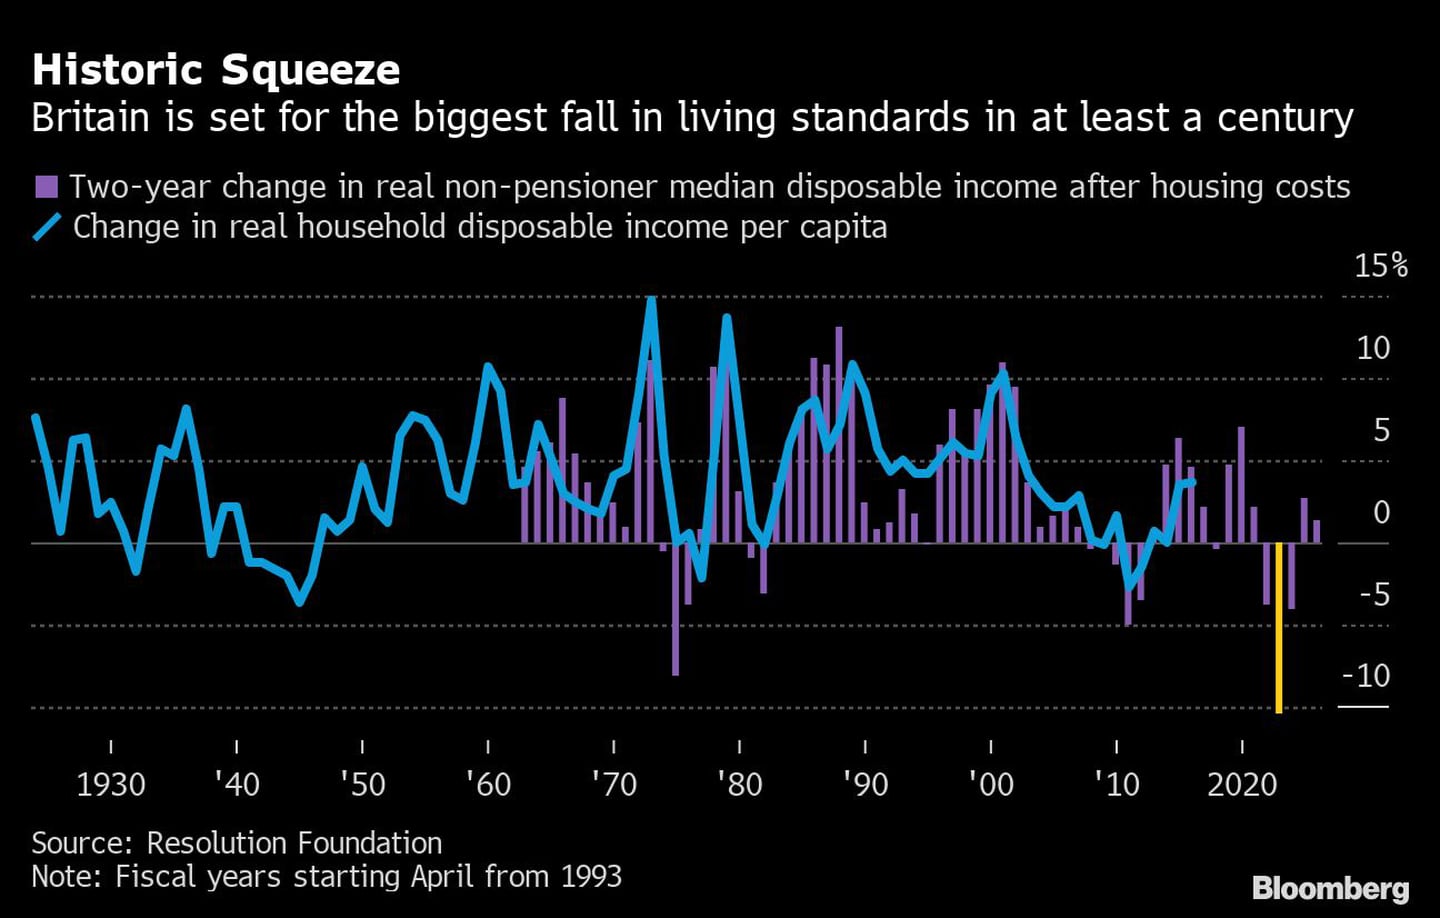 Historic Squeeze | Britain is set for the biggest fall in living standards in at least a centurydfd